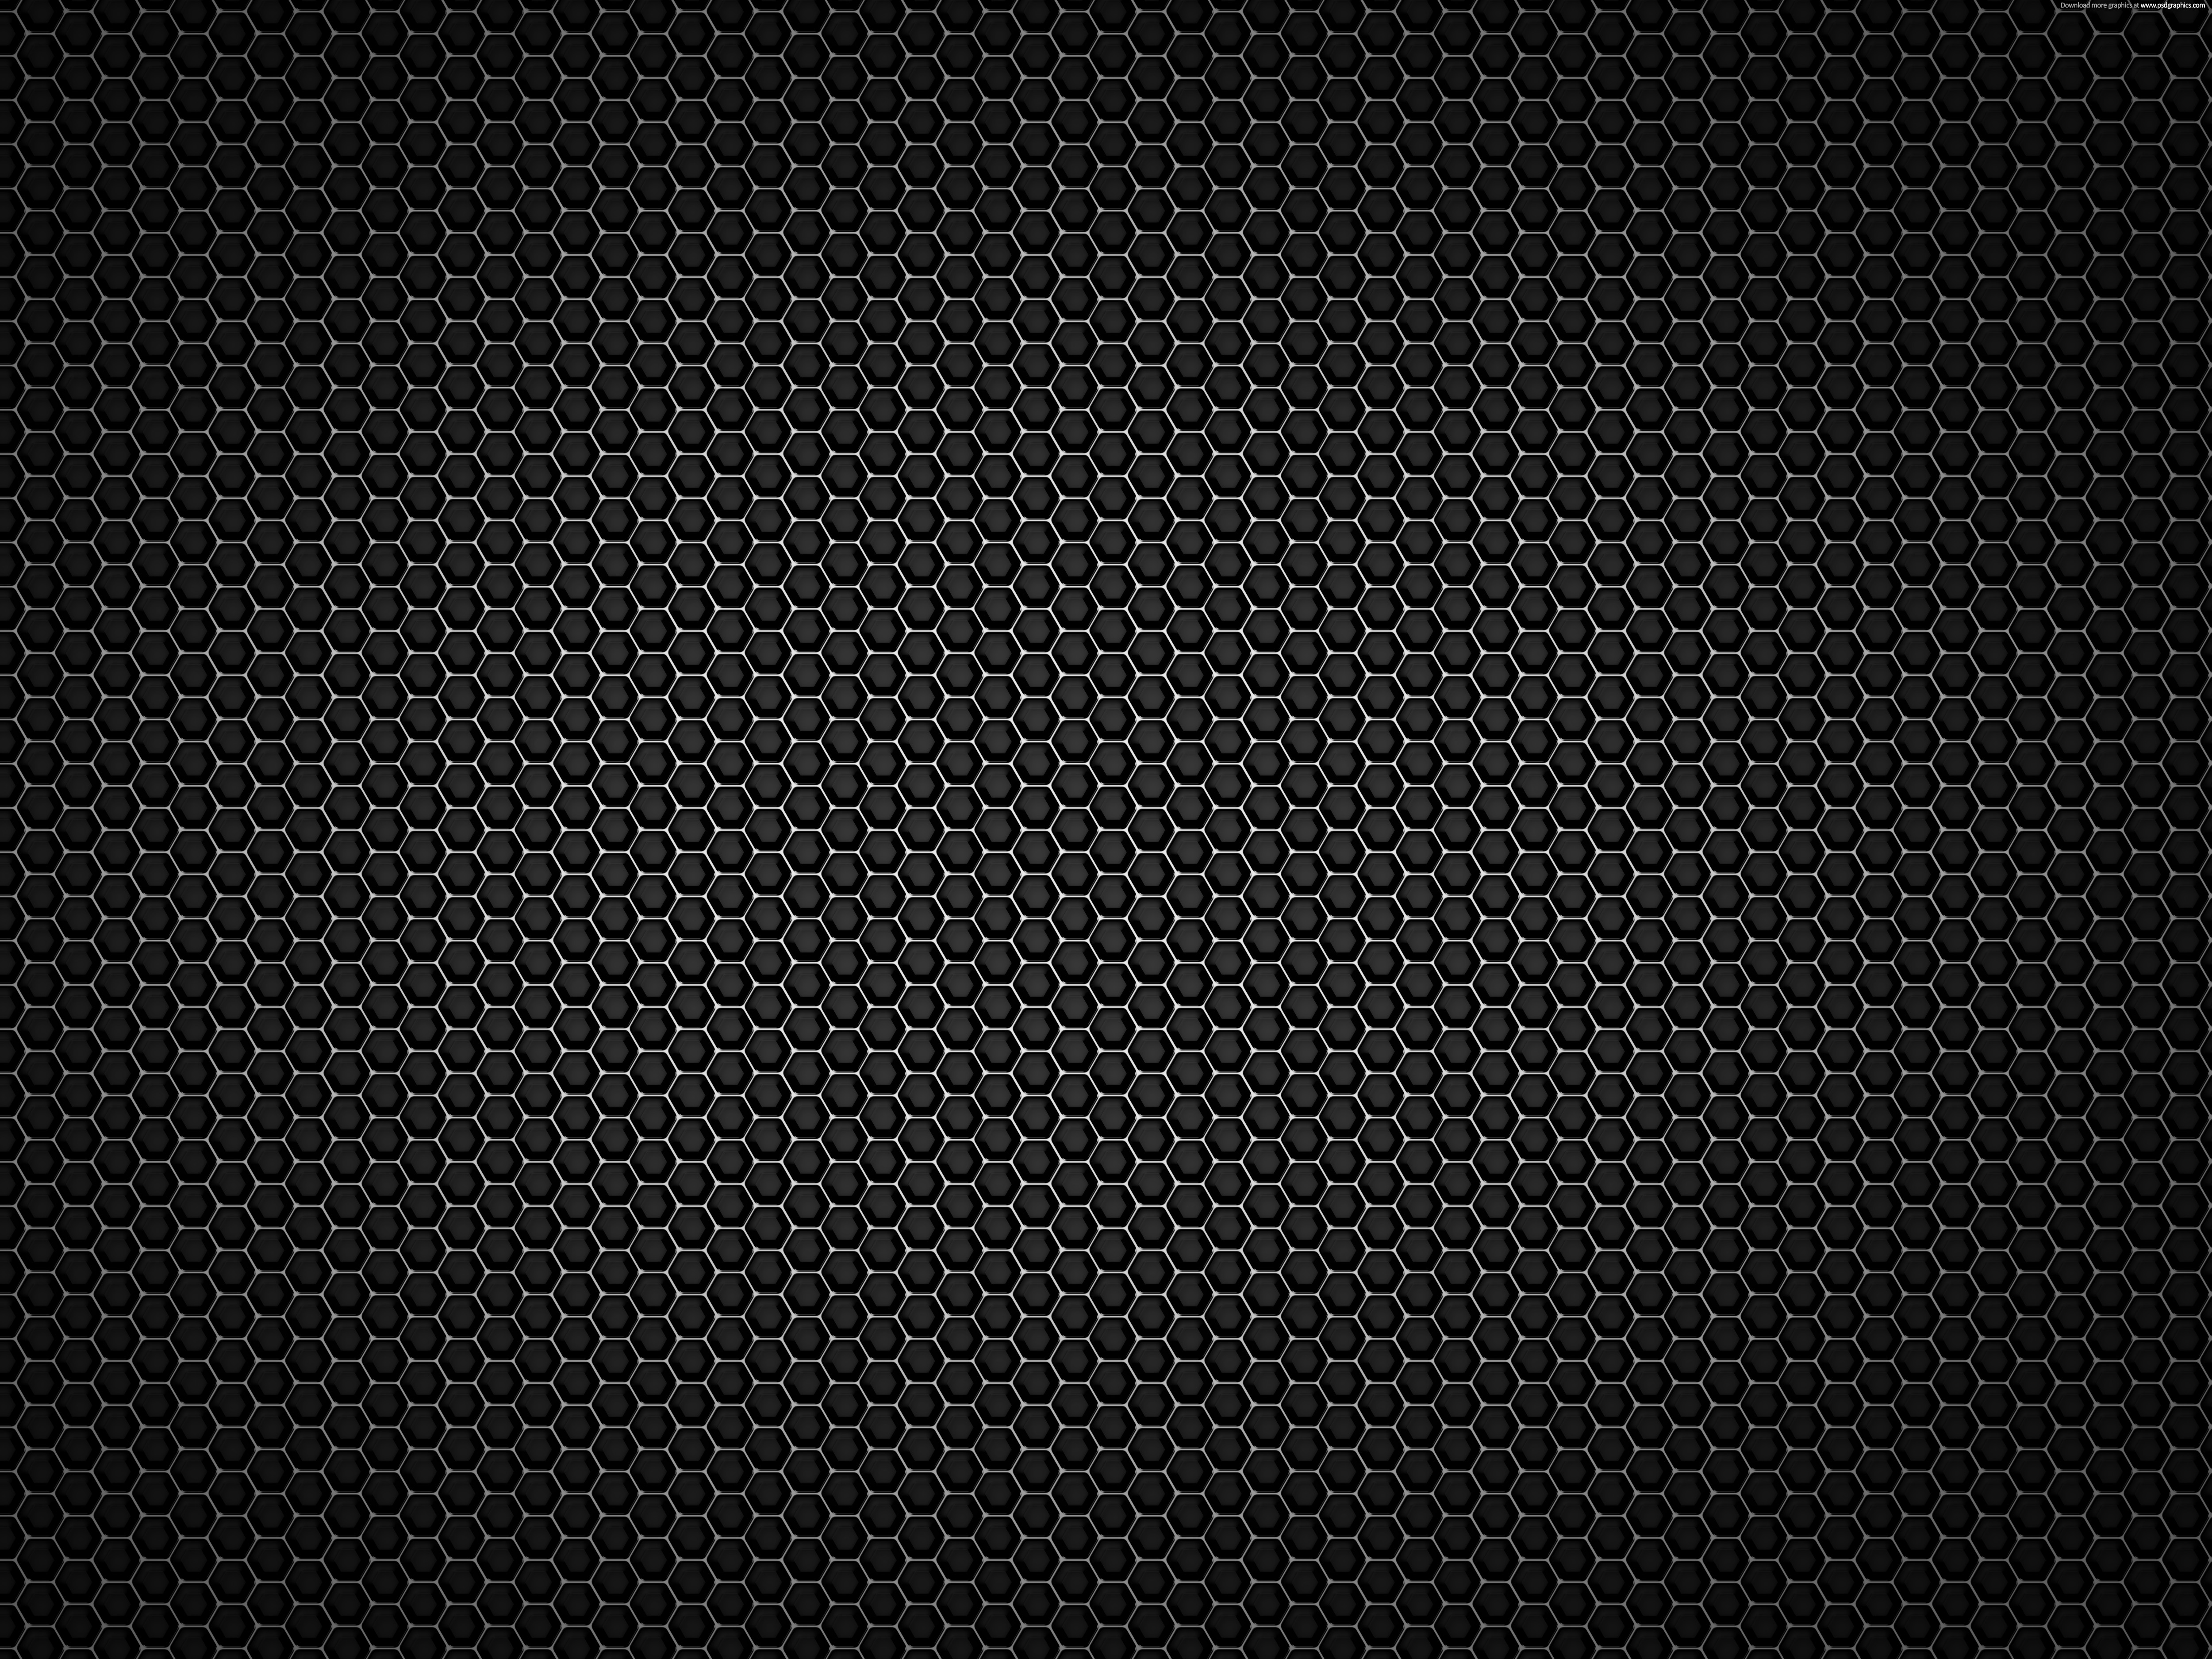 White grid black background Royalty Free Vector Image